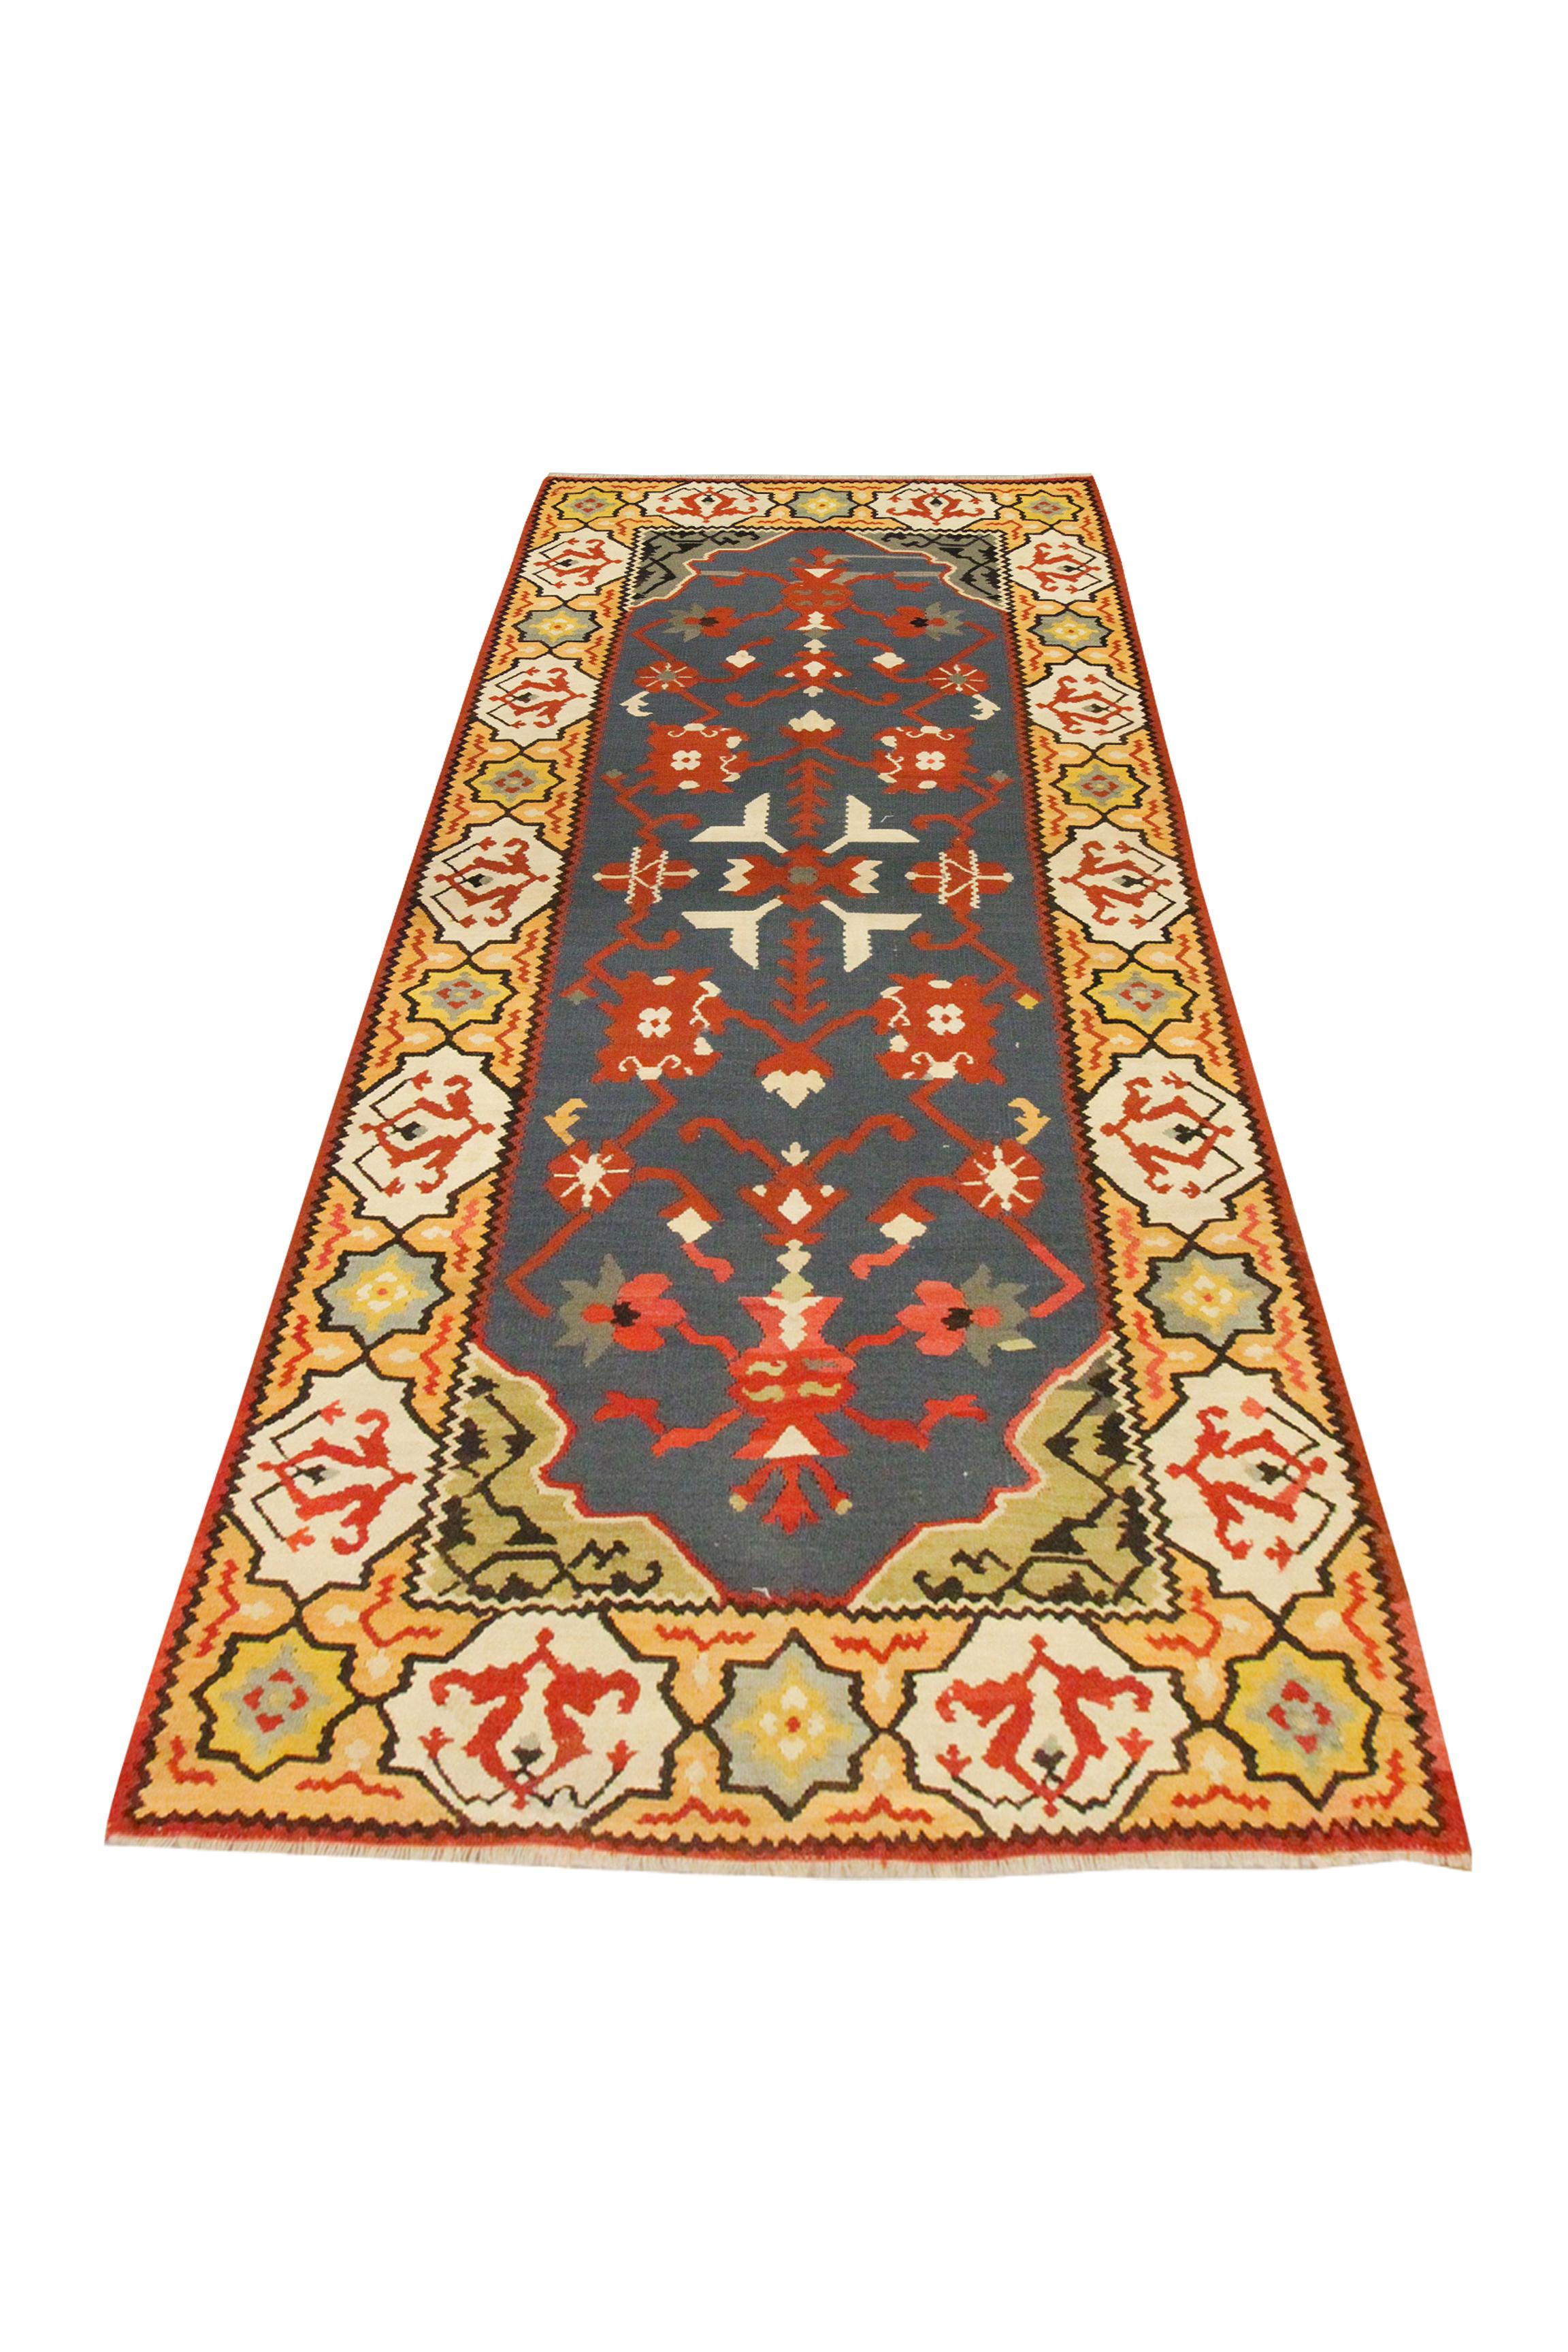 Red, blue, yellow and cream make up the main accent colours in this bold wool area rug. The central design has been woven on a blue background with red and cream accents that make up the symmetrical pattern. A yellow repeating pattern border has